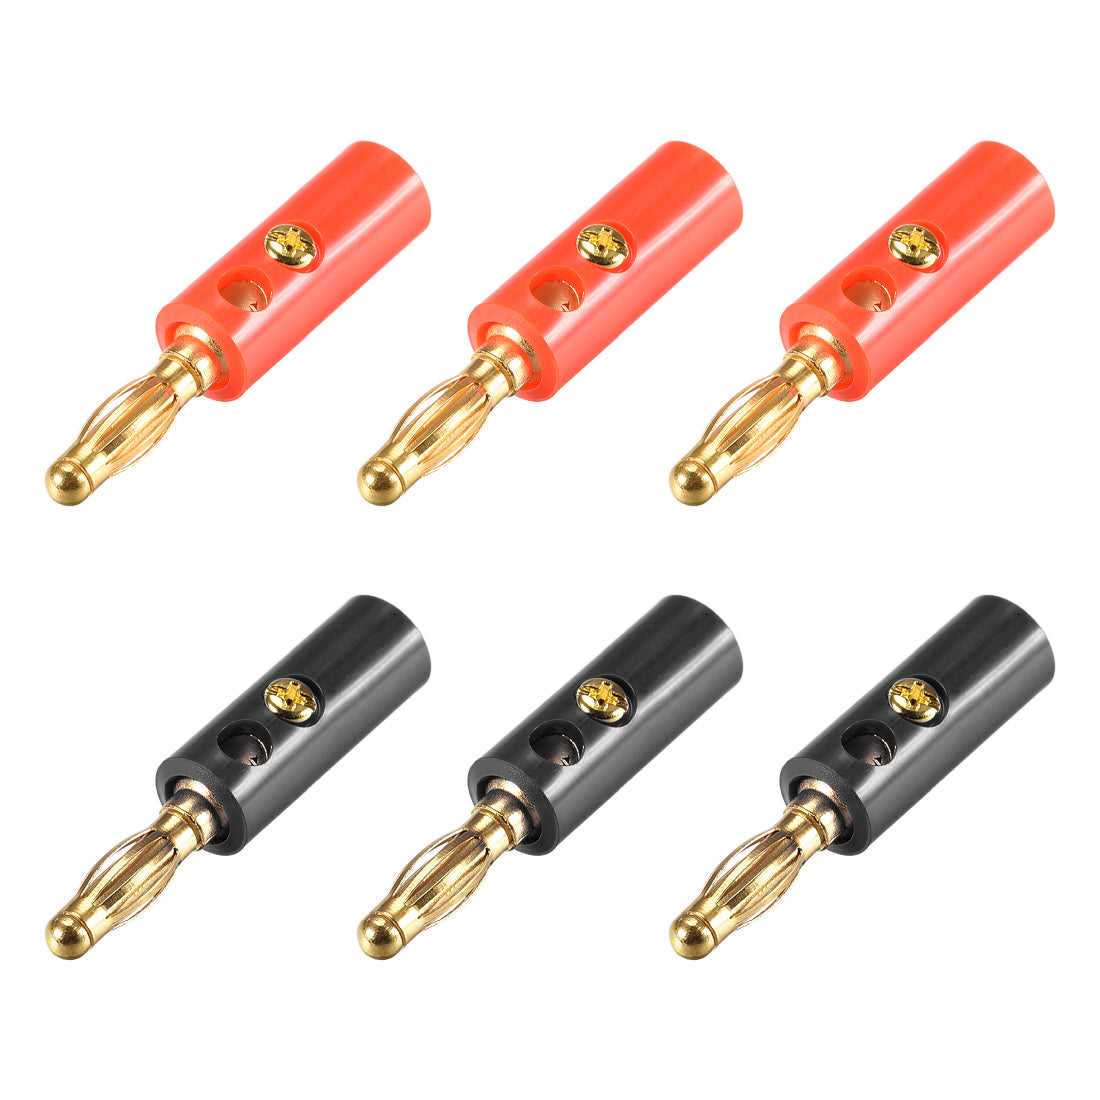 uxcell Uxcell 4mm Banana Speaker Wire Cable Screw Plugs Connectors 2 Colors 6pcs 10A Jack Connector